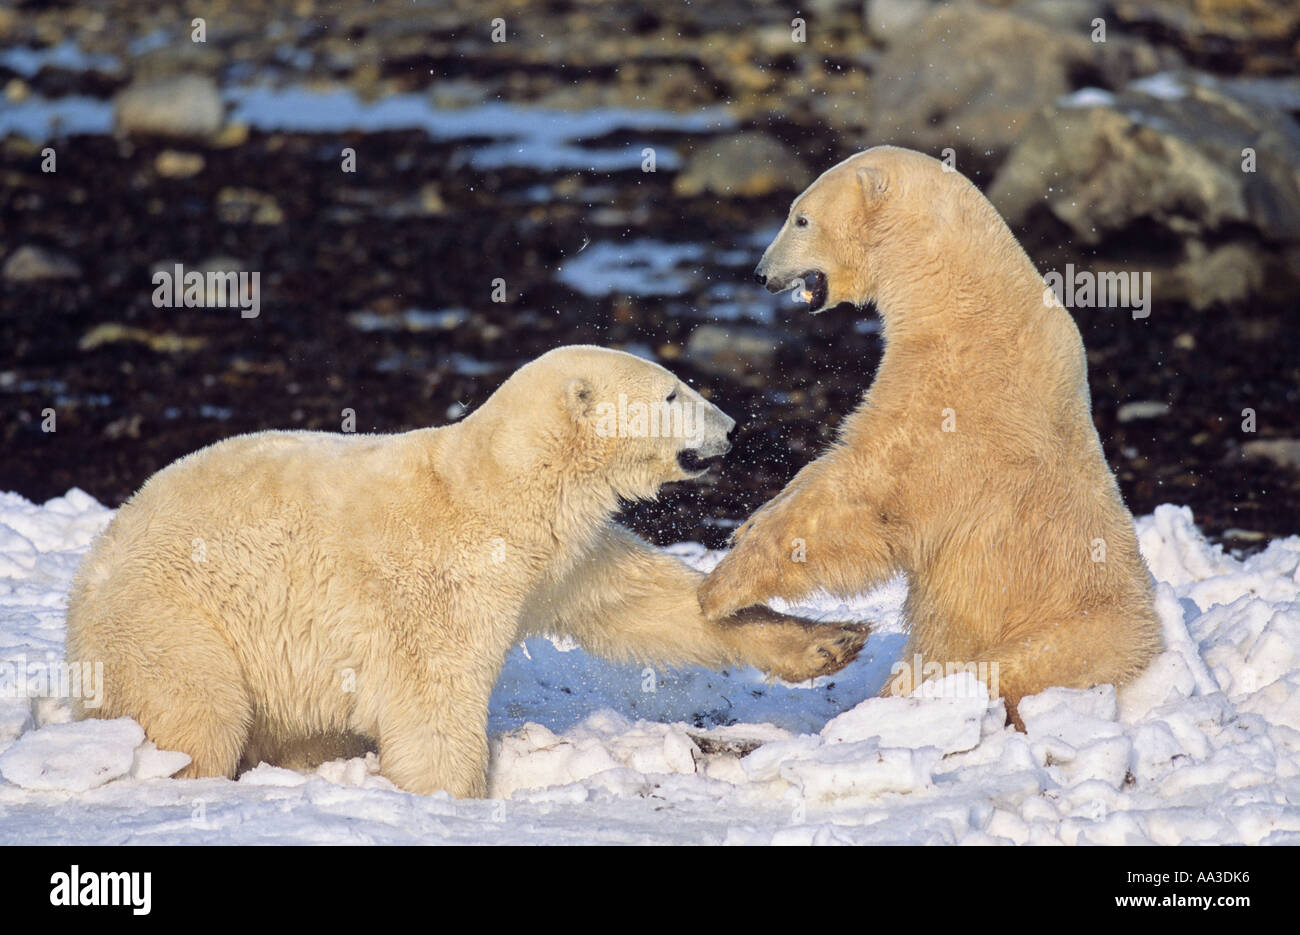 Les ours polaires playfighting wrestling Churchill Manitoba Canada Banque D'Images